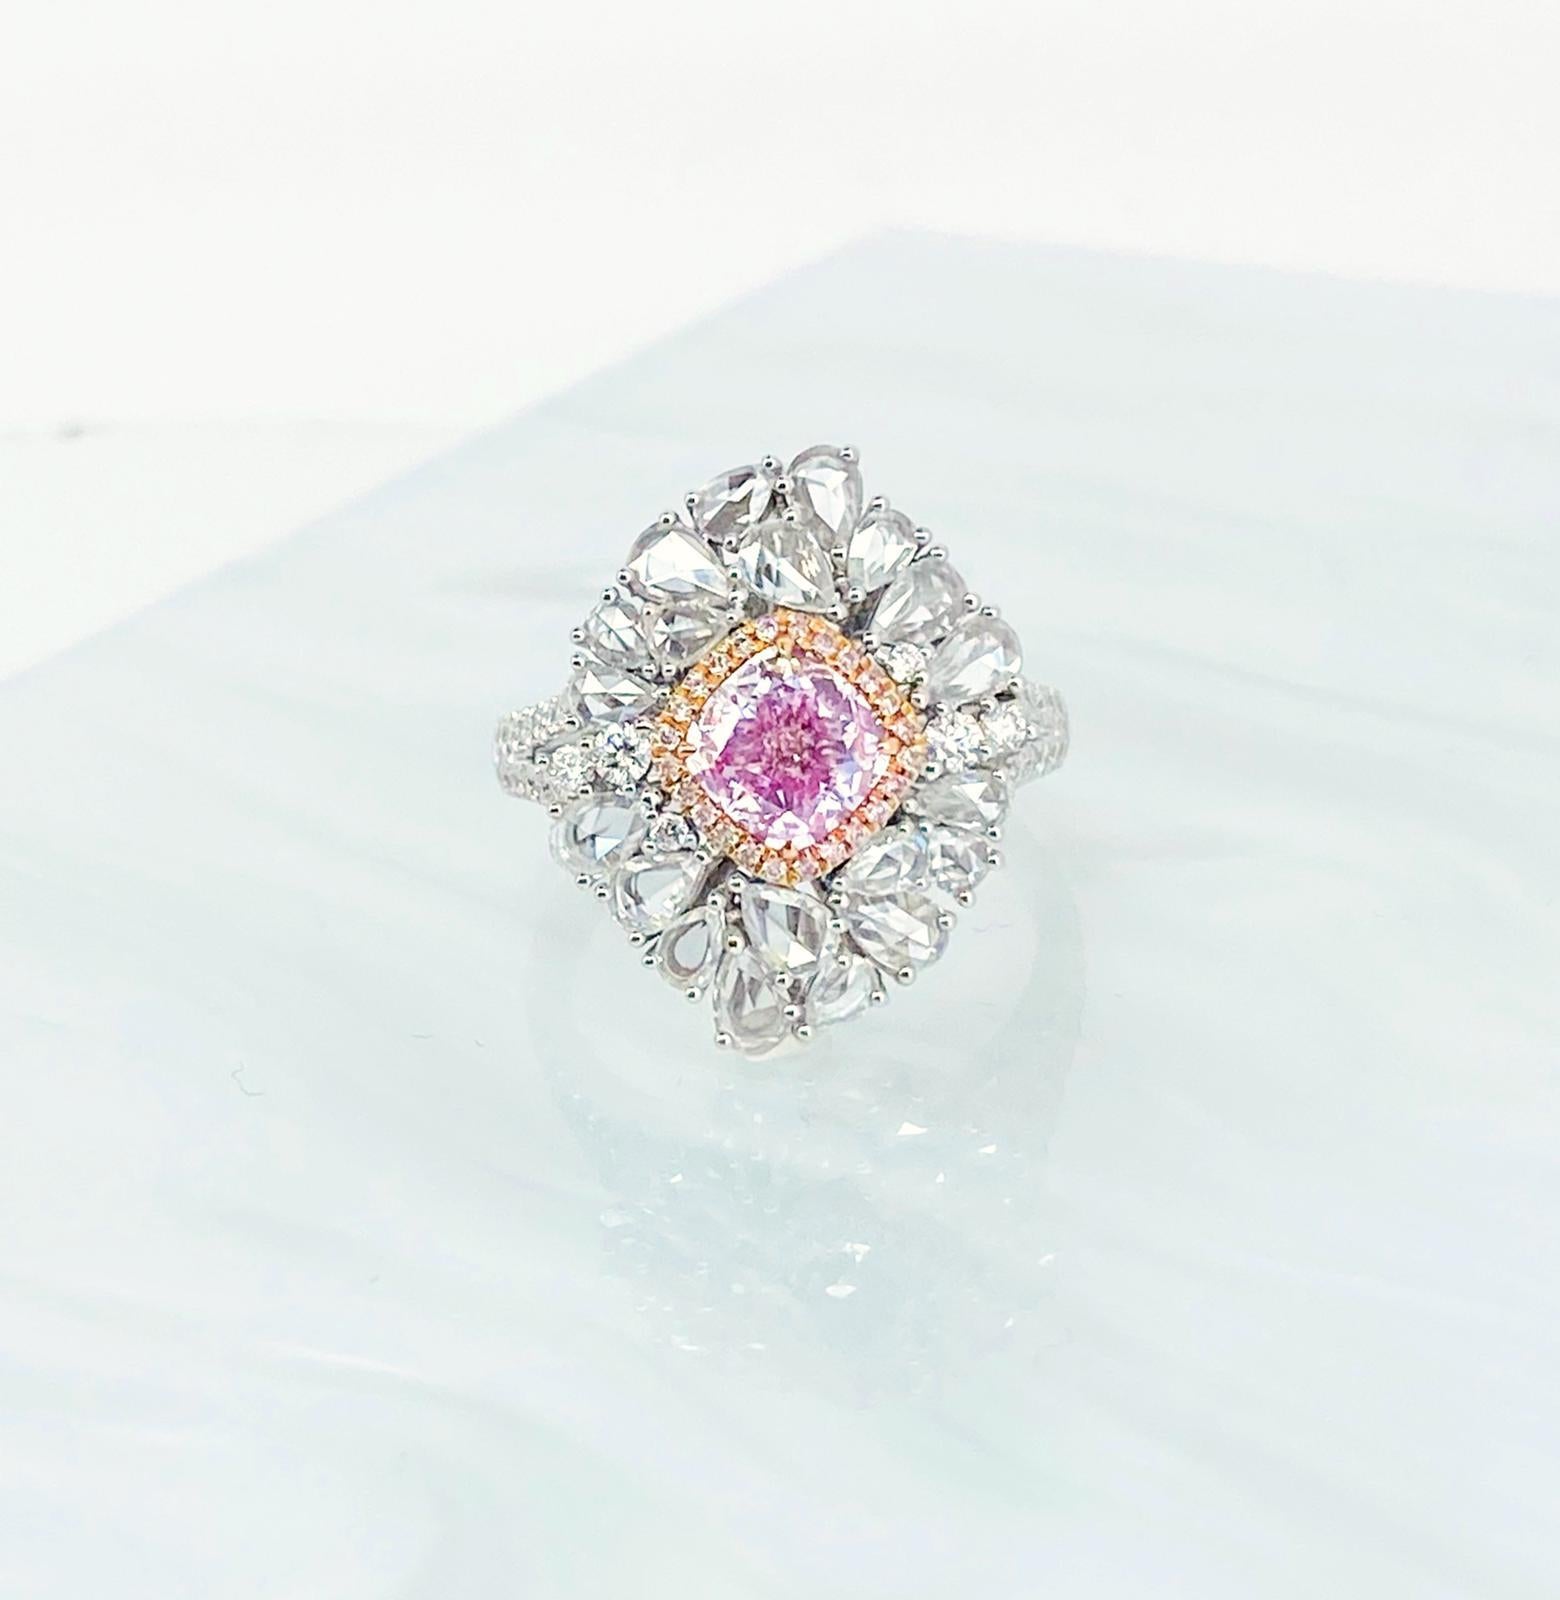 GIA Certified 1.01 Carat Light Pink Diamond Ring VS2 Clarity For Sale 4